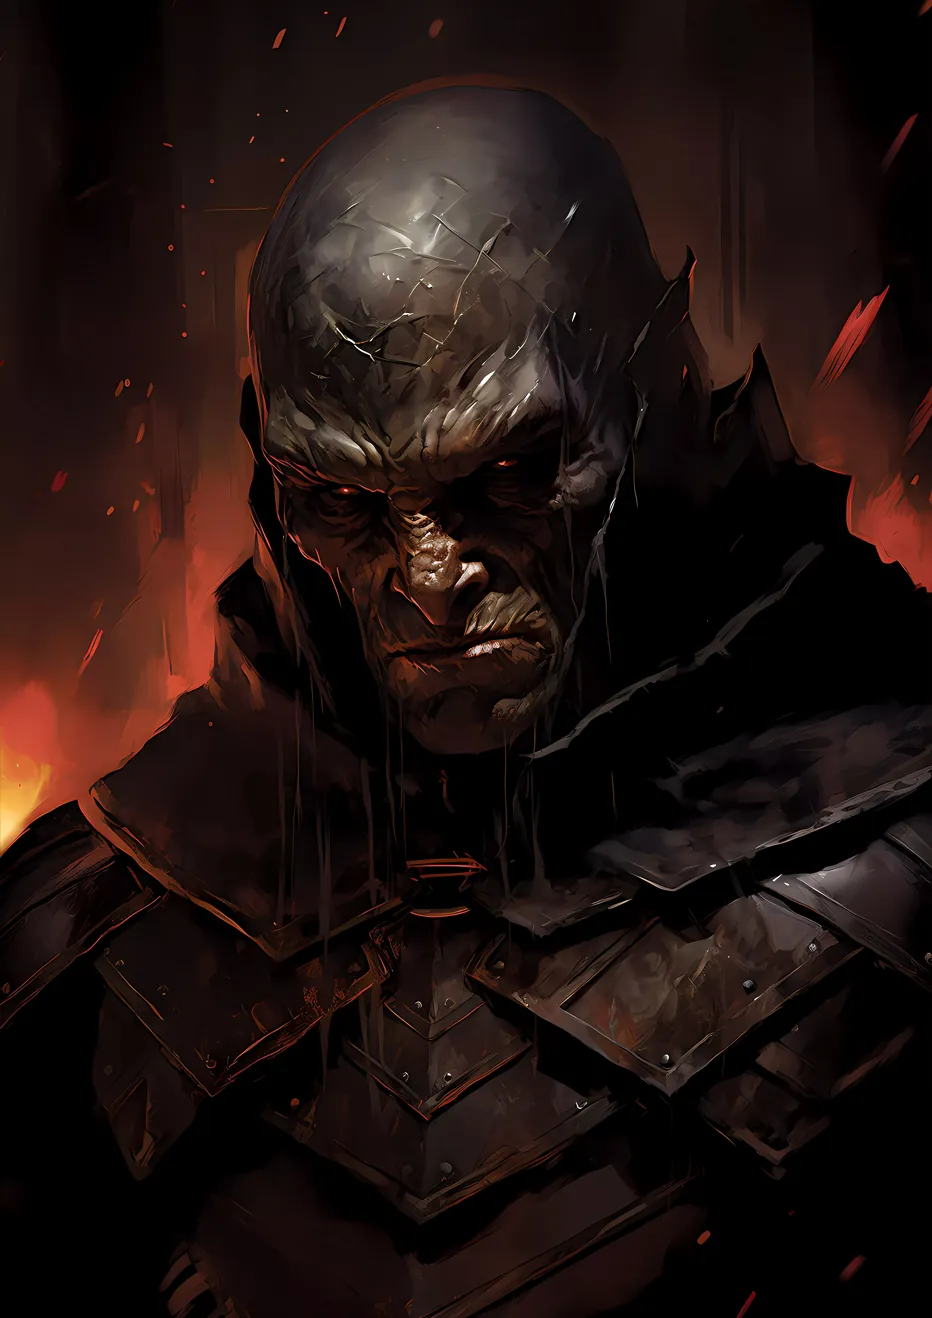 A ruthless orc warrior stands amidst engulfing flames in the captivating artwork titled "Ruthless Orc Warrior."